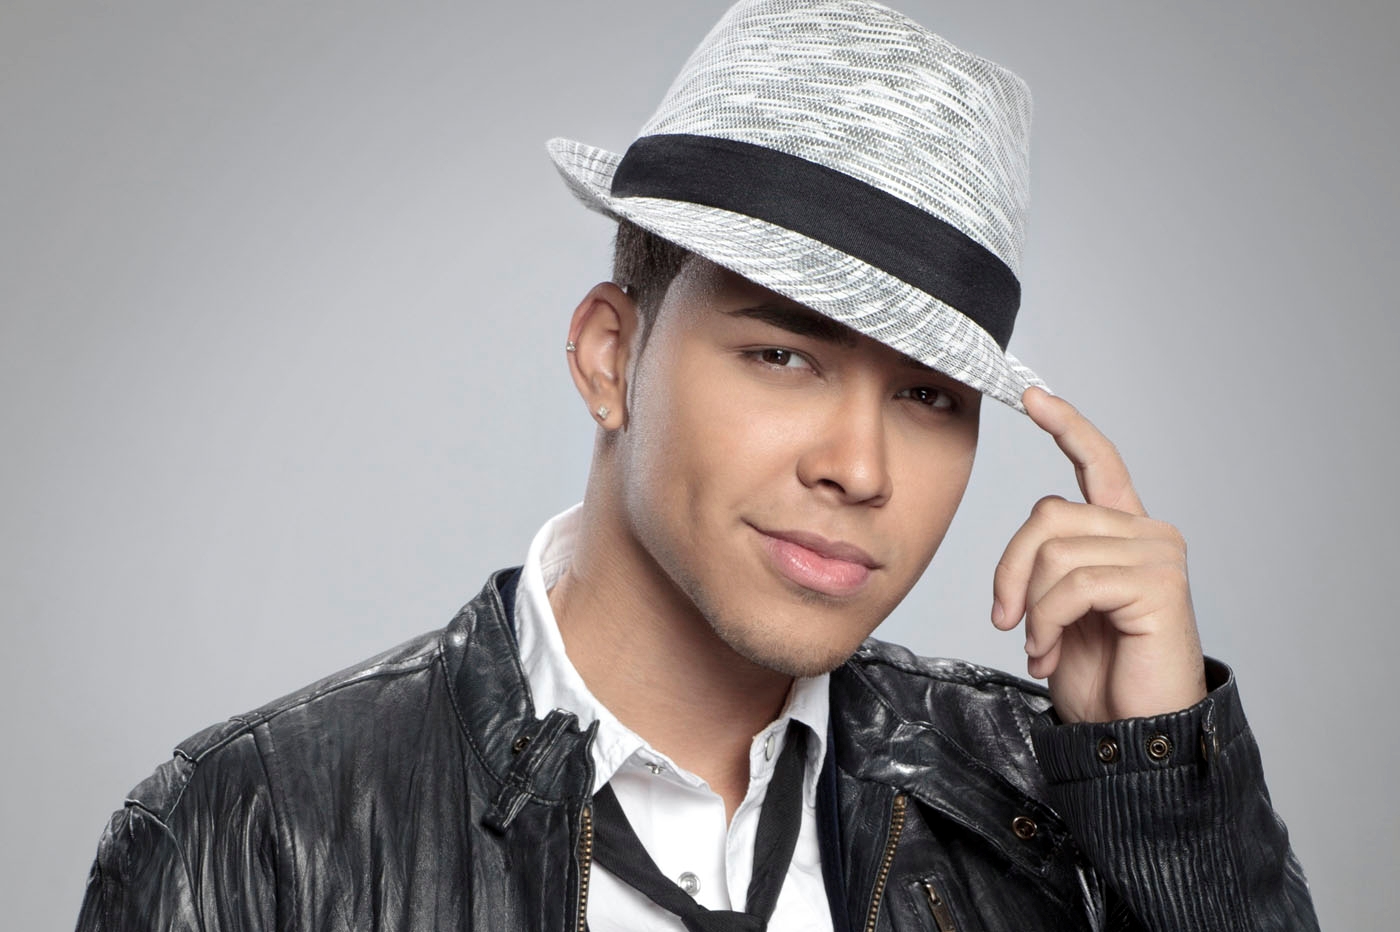 Close To You - Prince Royce